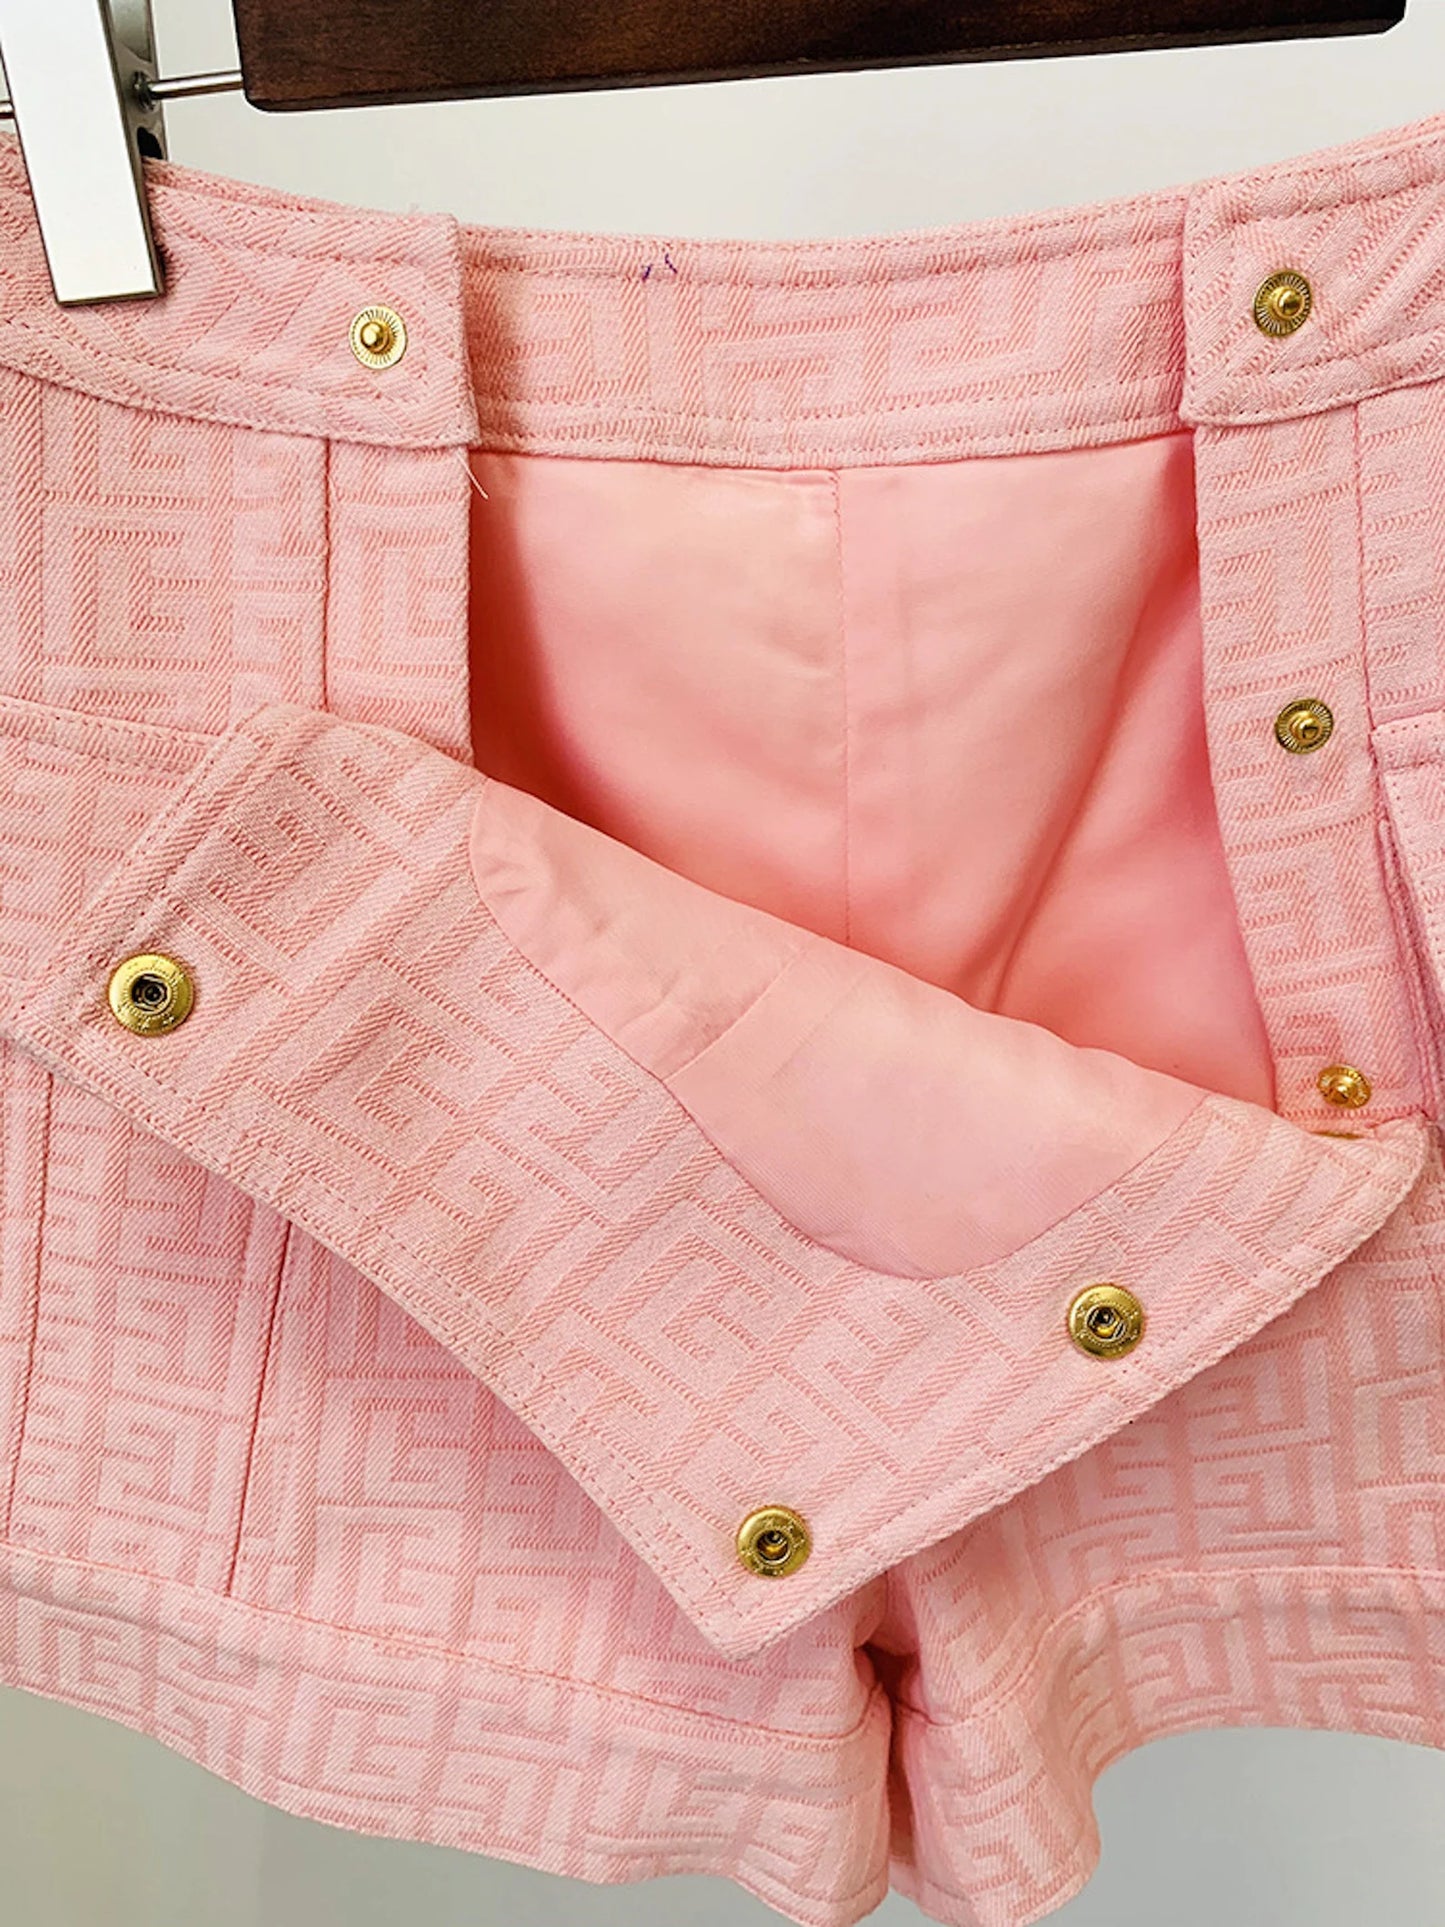 Pink Maze Pattern Short Aviator Bomber Jacket + High Waist Shorts Suit For Ladies - Forerunner in Fashion Enjoy your Spring and Summer season! Put on a lovely attire this Spring. Warm up while projecting a sexy image! One should be in your wardrobe because it emphasises your curves and gives you a confident appearance. Having a strong sweater game is usually a smart idea. 